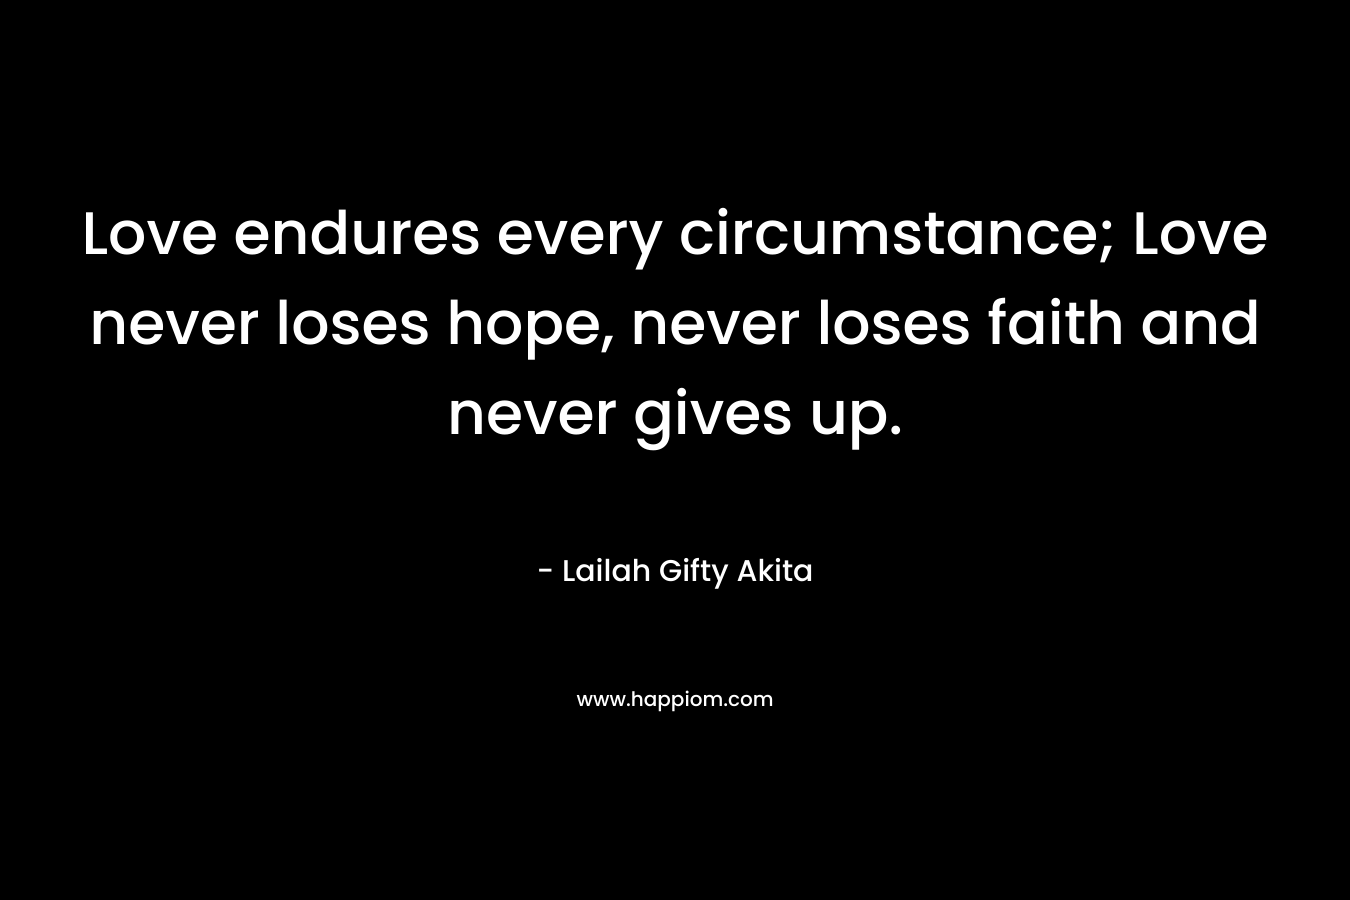 Love endures every circumstance; Love never loses hope, never loses faith and never gives up.